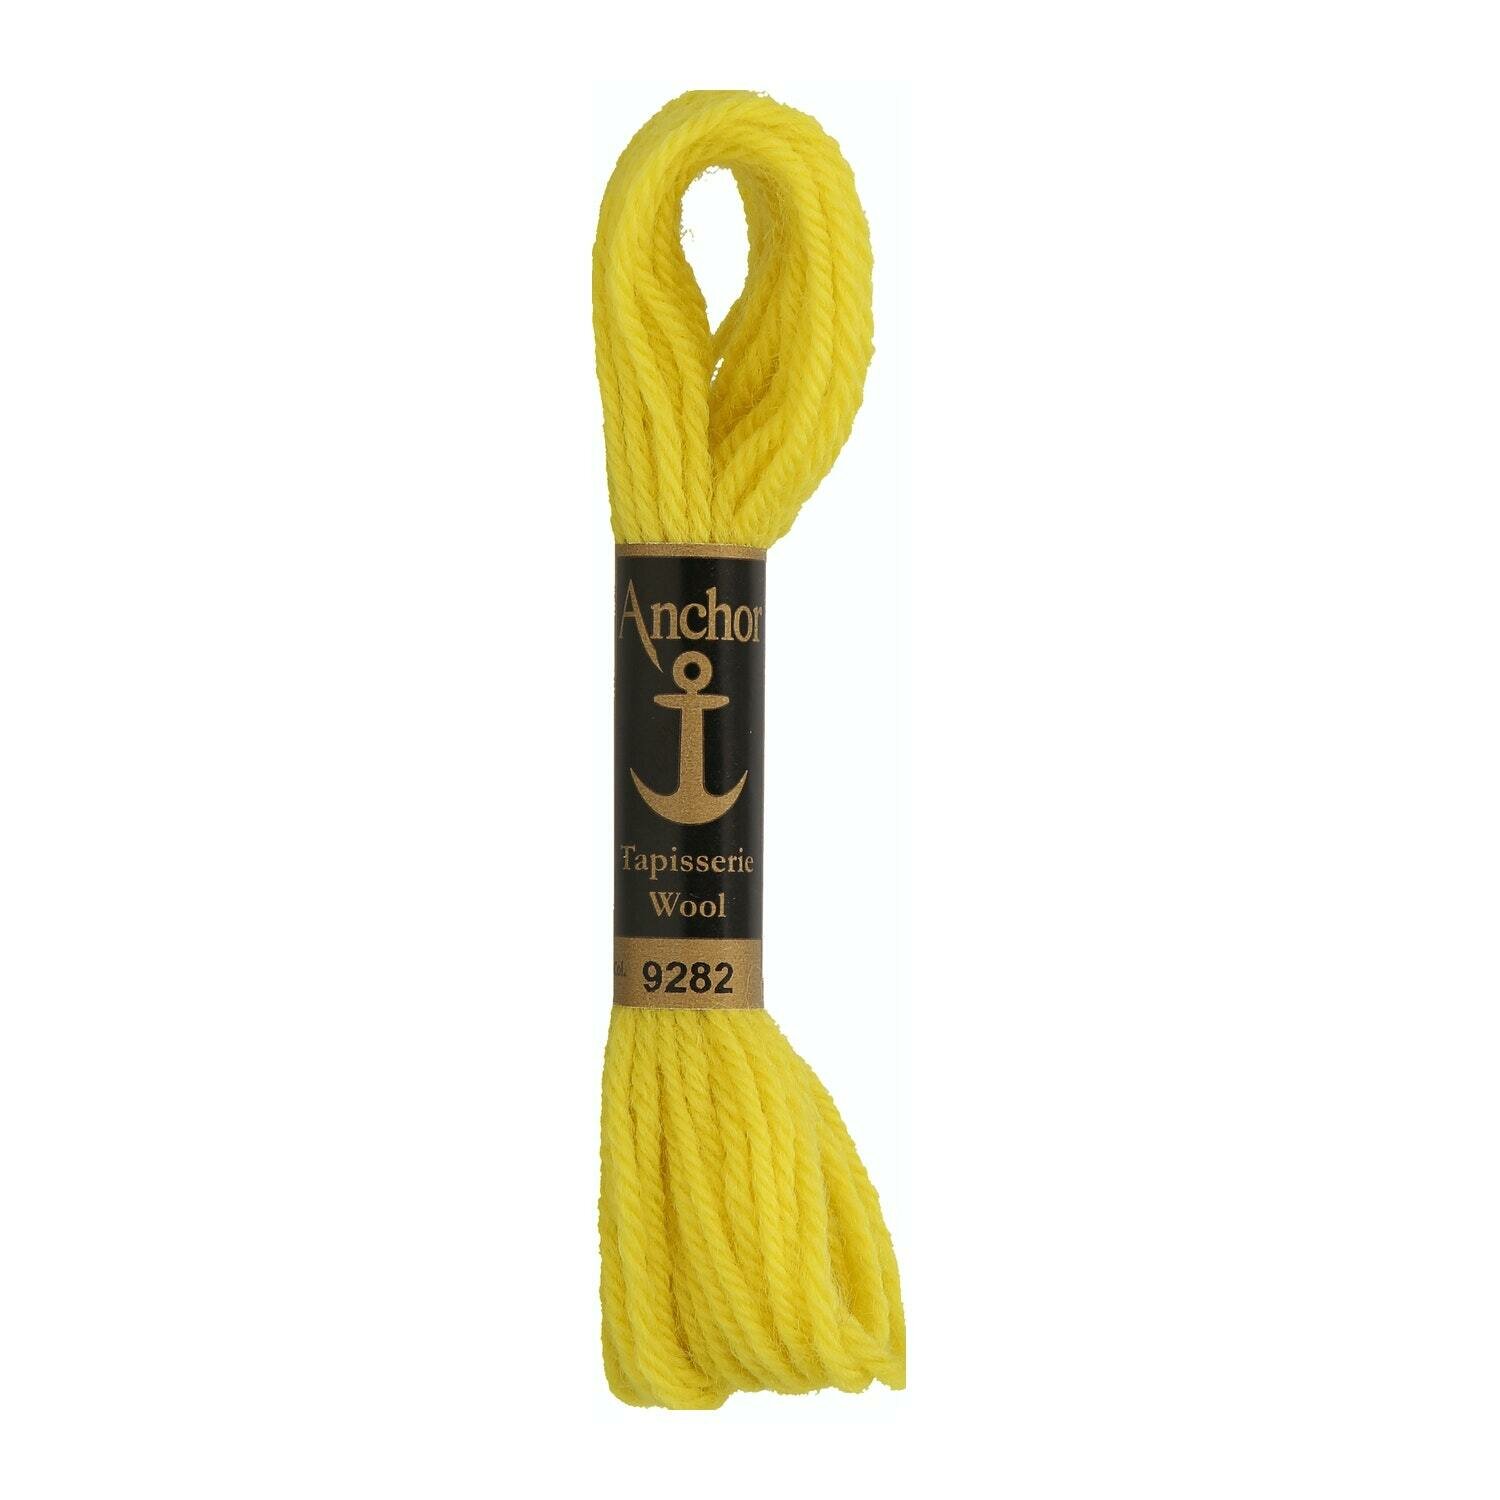 Anchor Tapisserie Wool # 09282